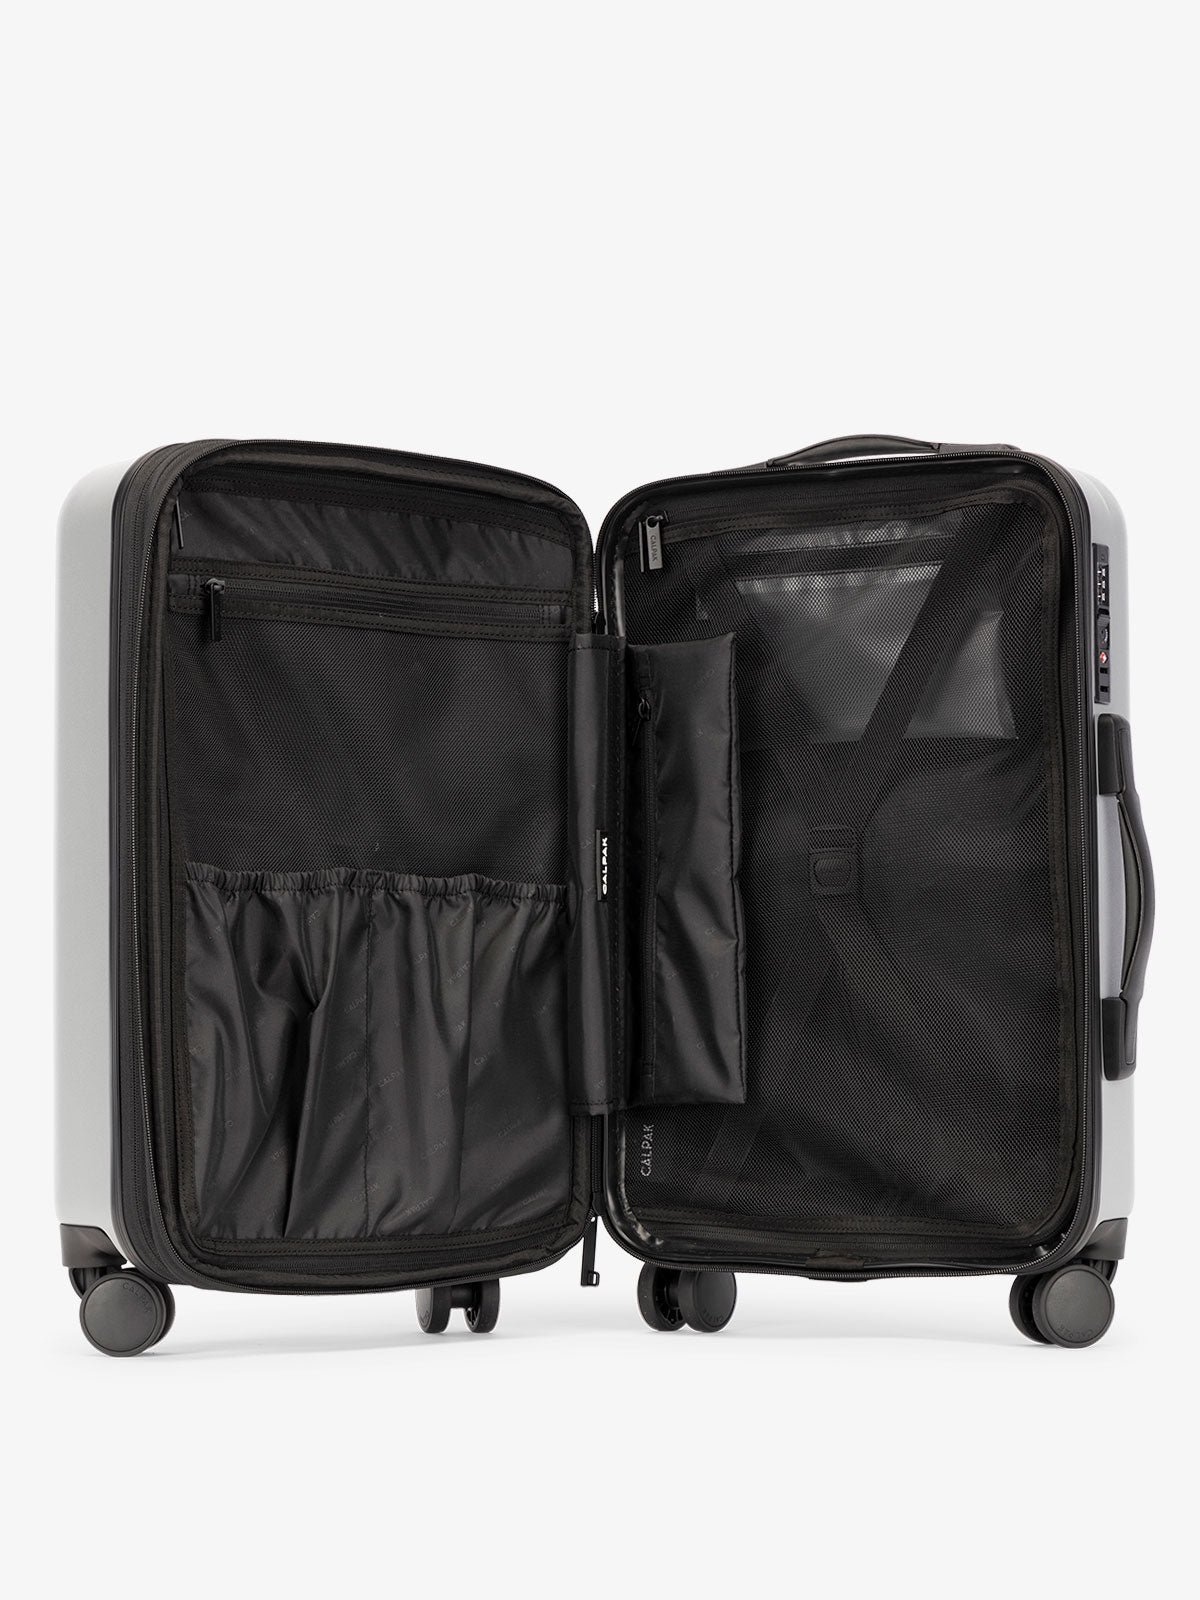 CALPAK Evry Medium Luggage features divided compartments with interior pockets for organized packing in gray